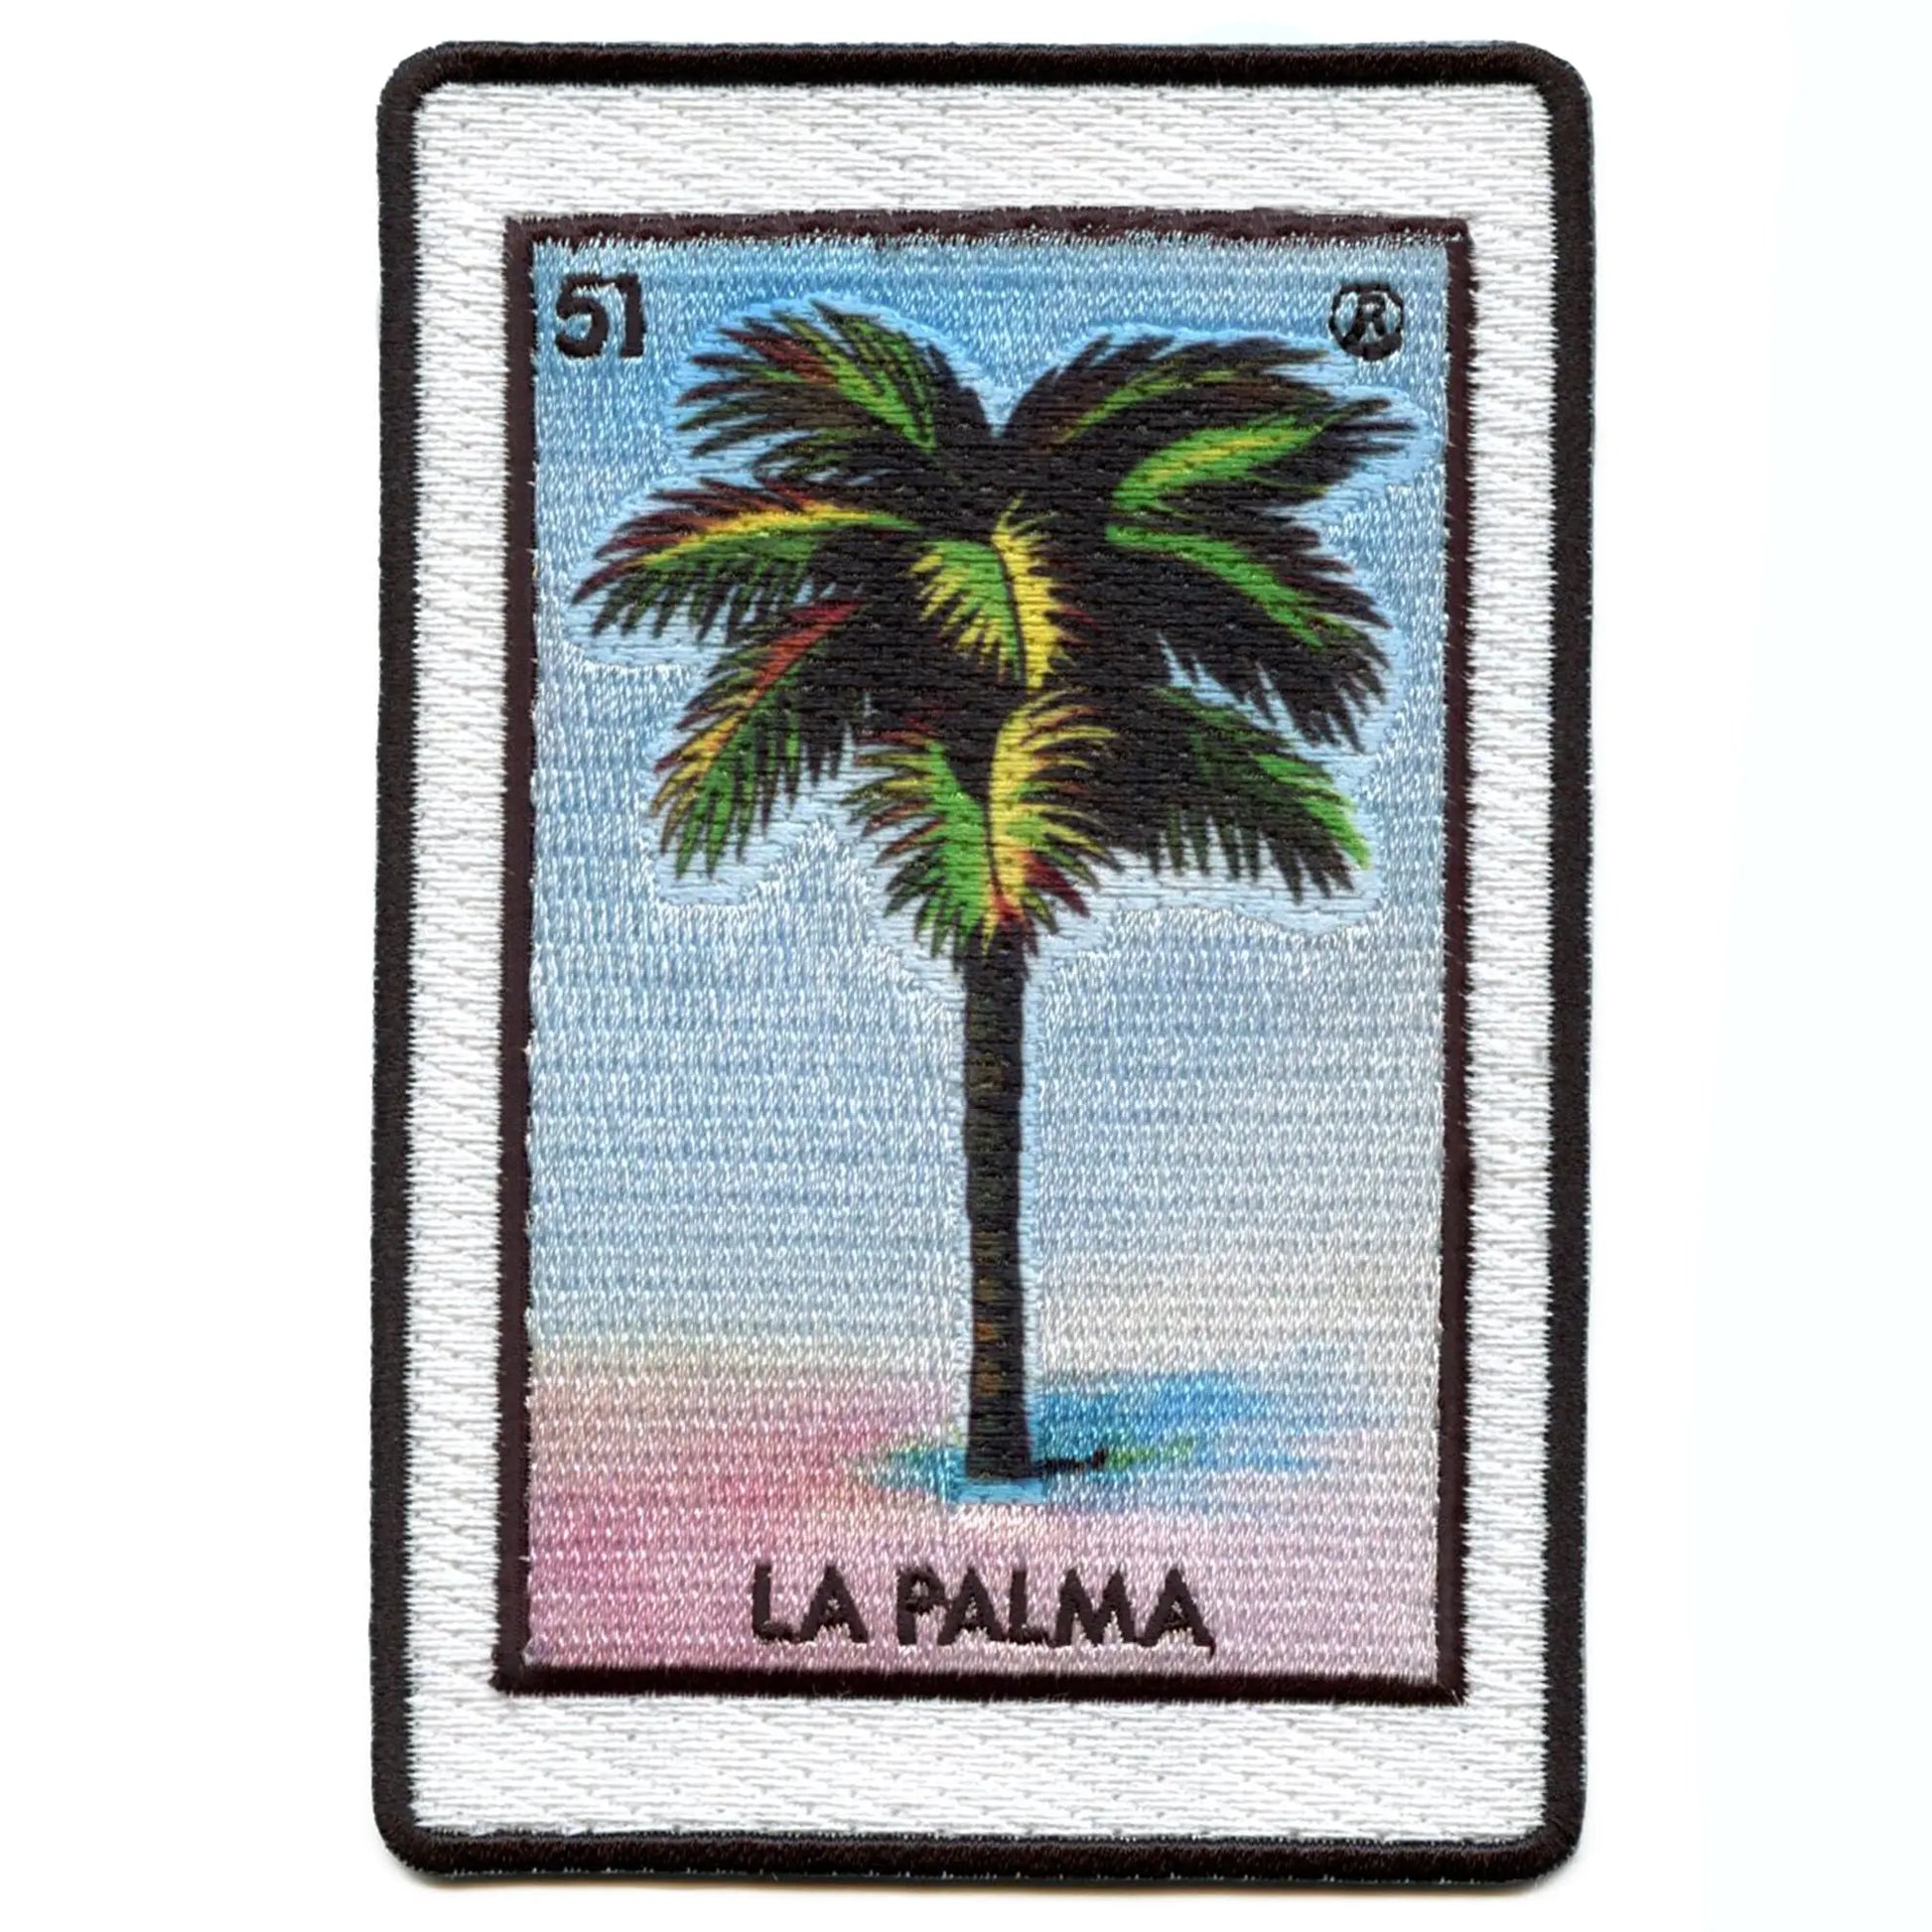 La Palma 51 Patch Mexican Loteria Card Sublimated Embroidery Iron On